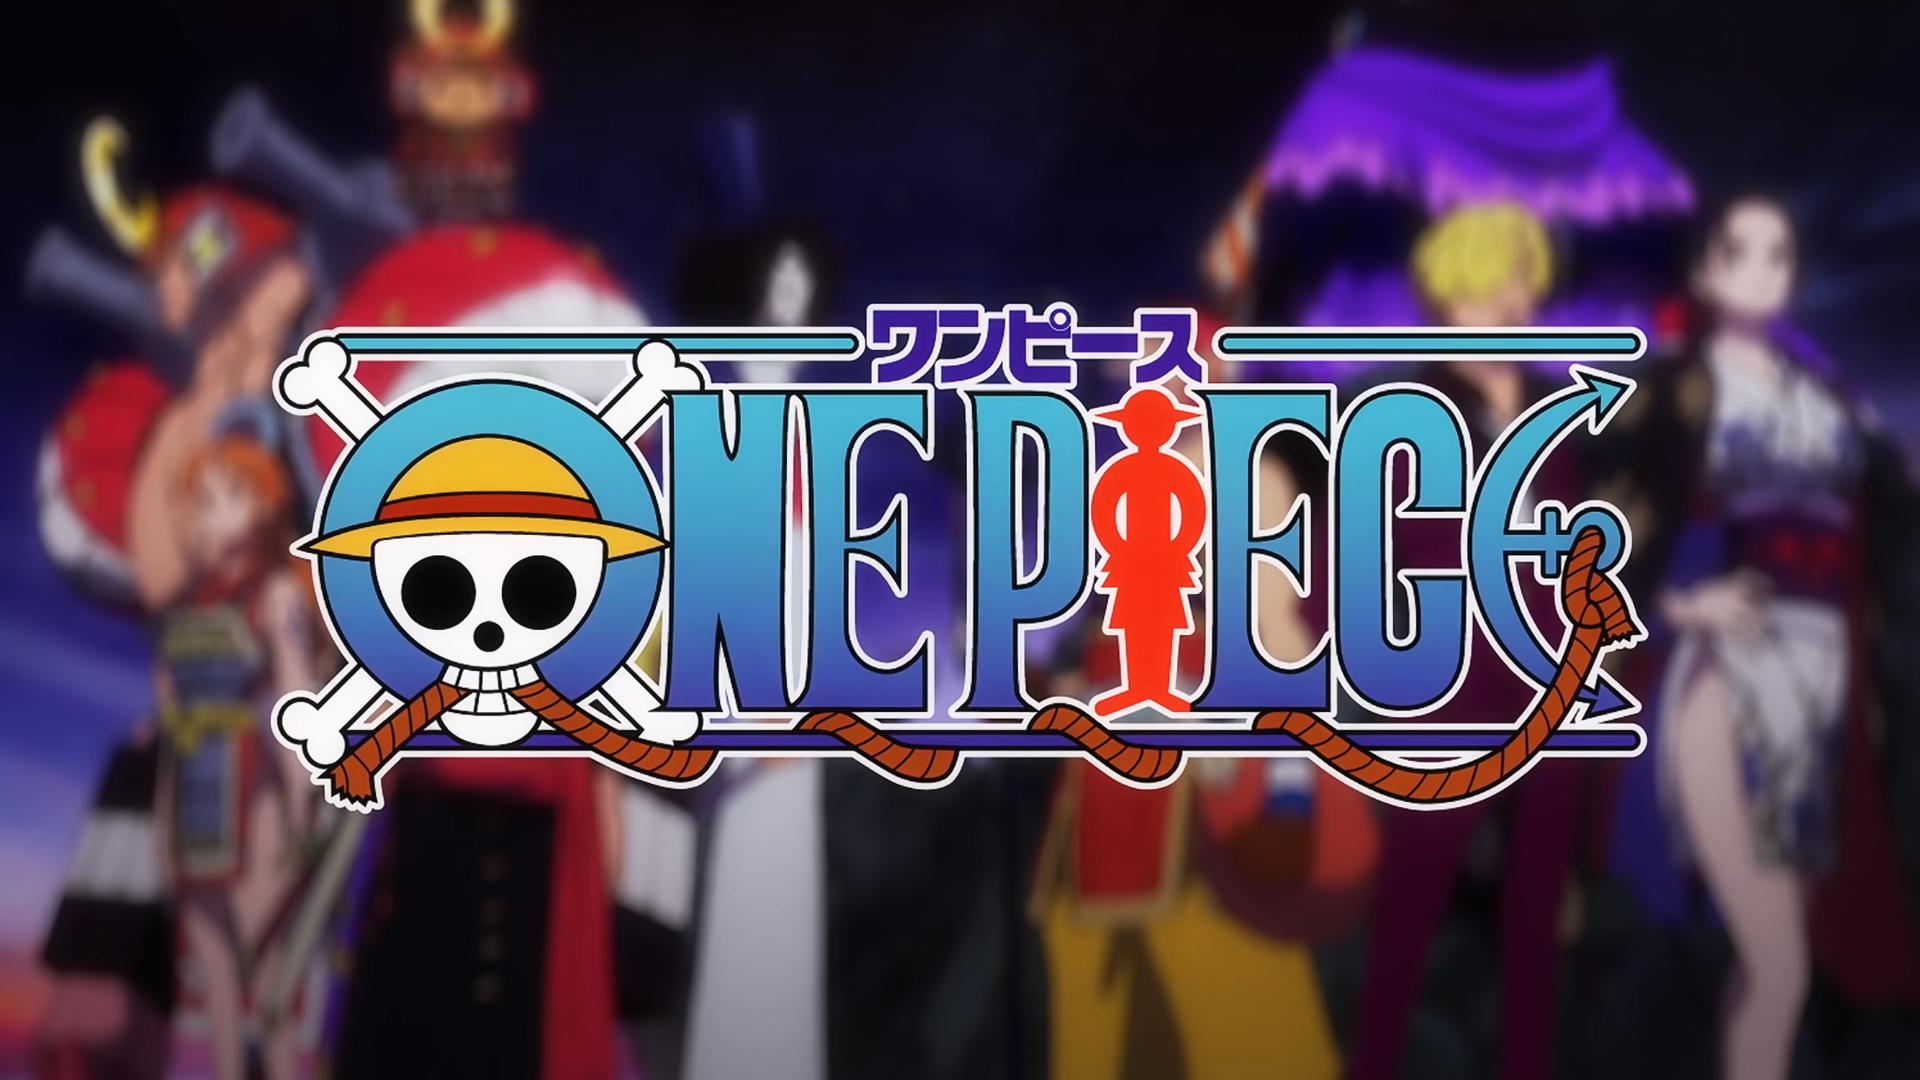 What to expect in One Piece Episode 1008